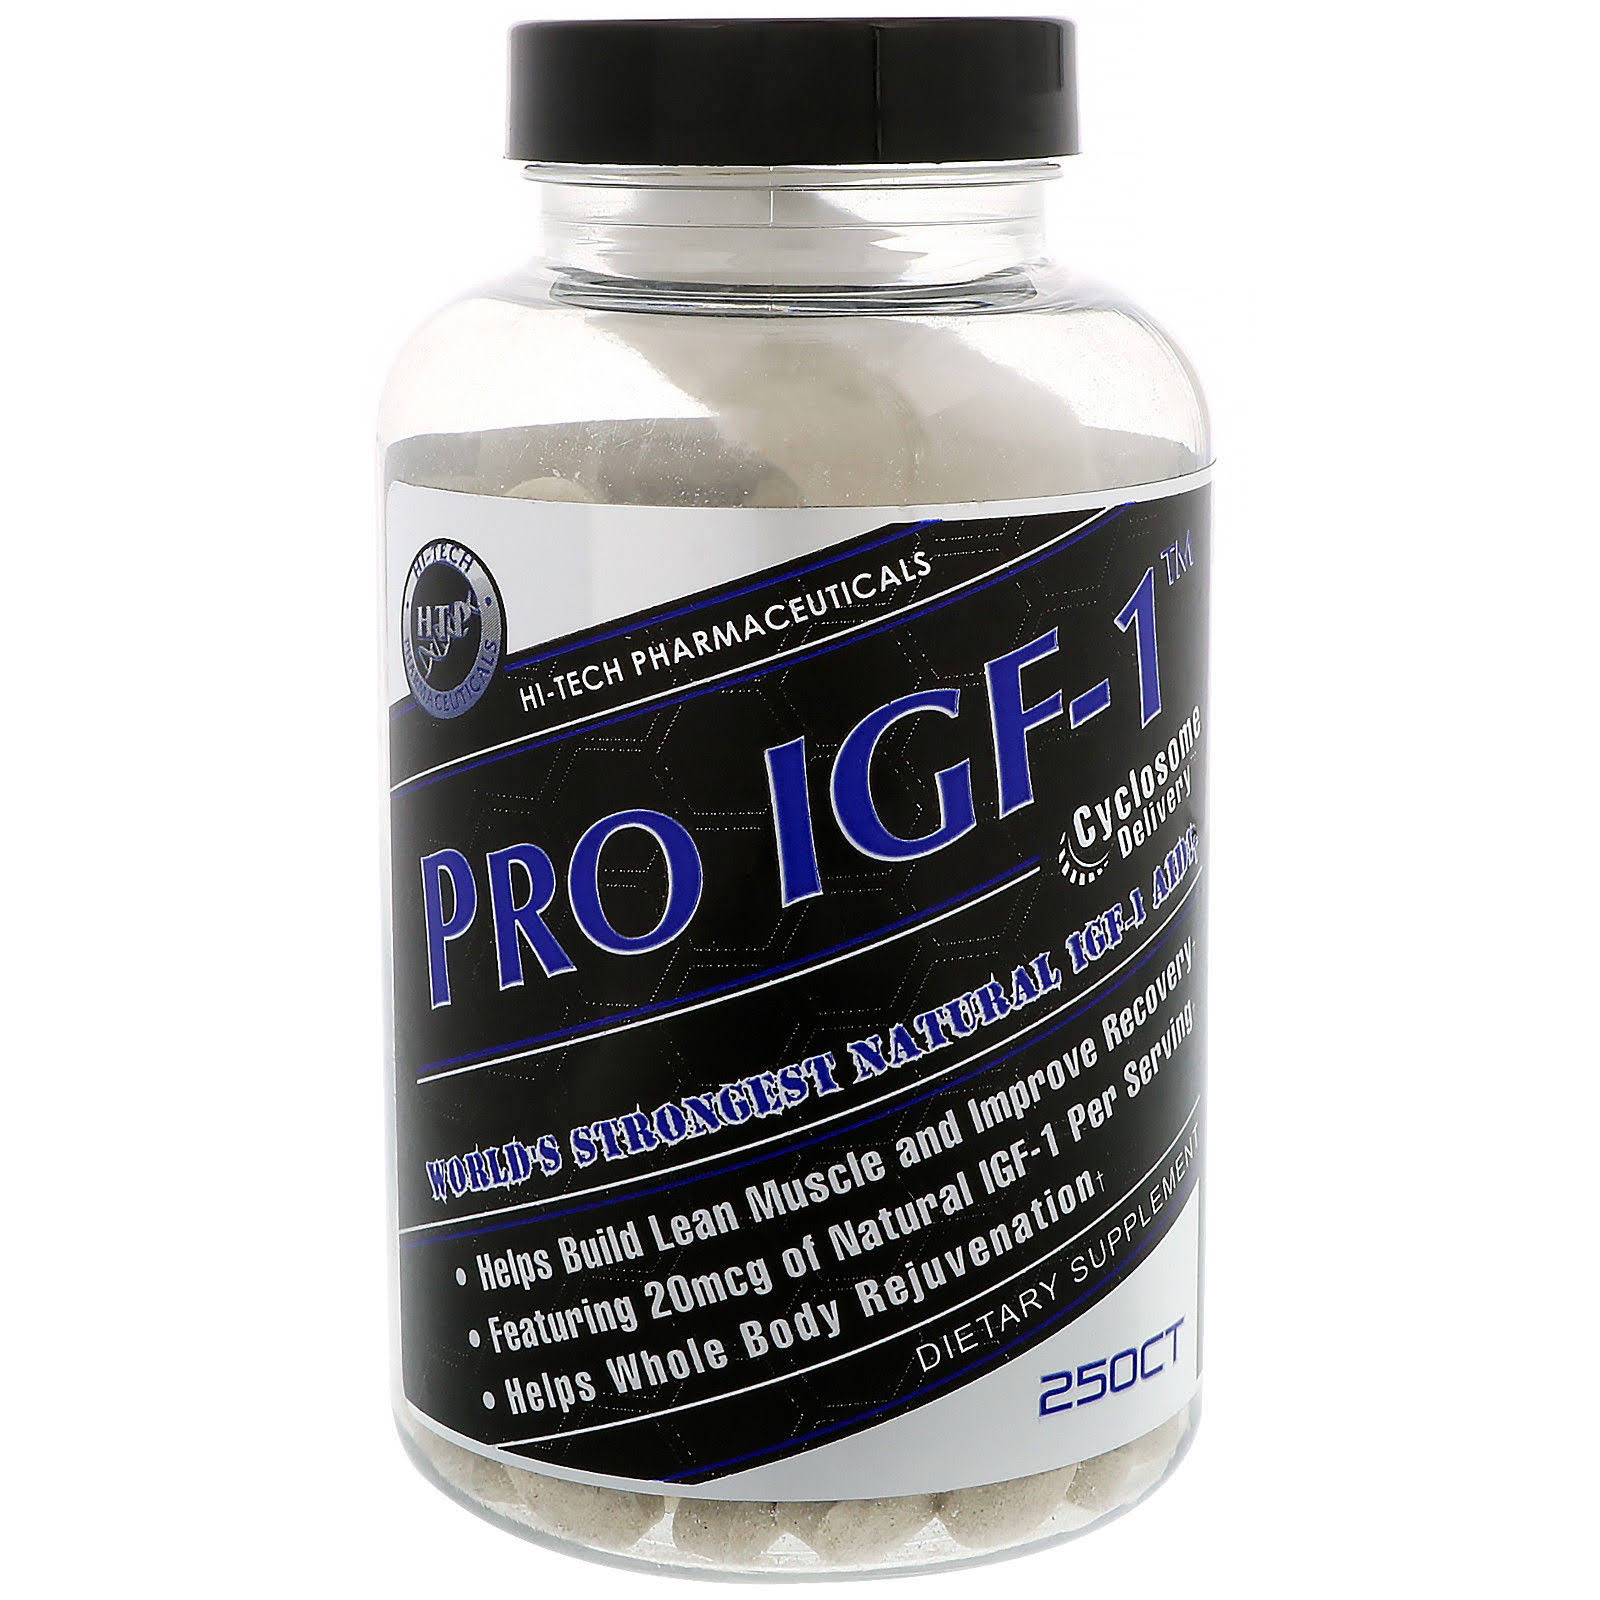 Hi-Tech Pharmaceuticals PRO-IGF from Whey Protein Isolate, 250 Tablets - New